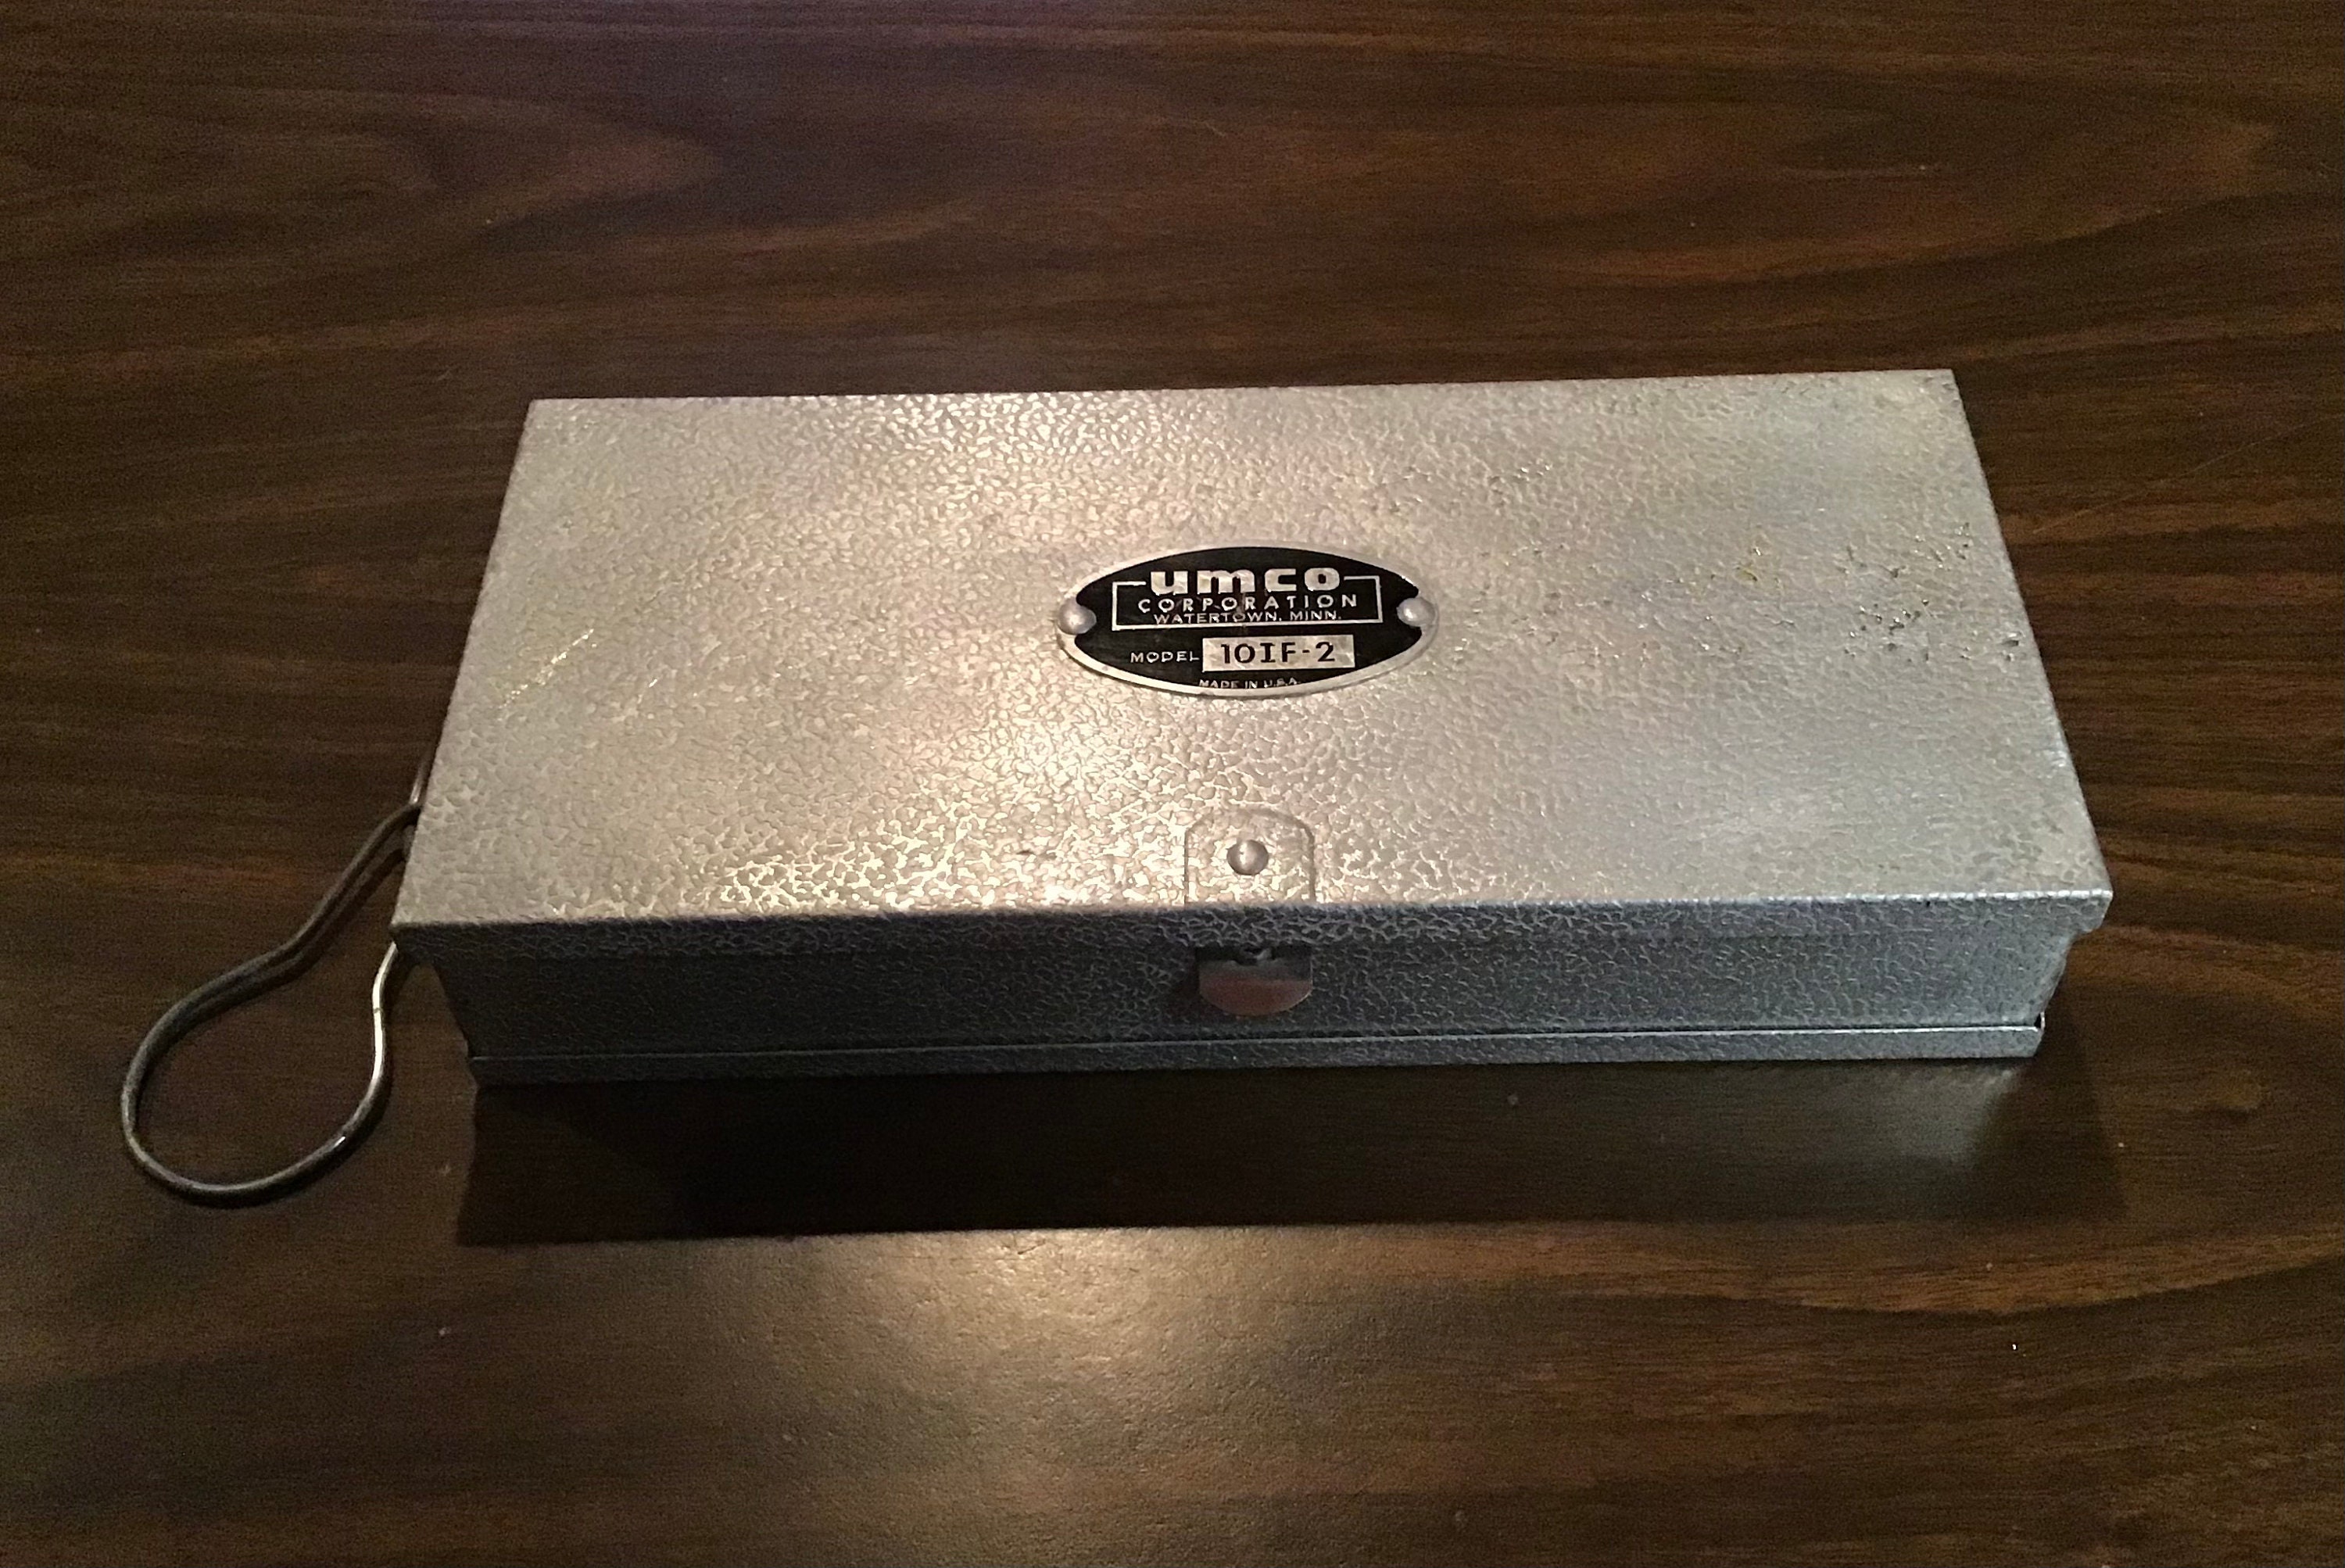 Rare Vintage Tackle Box for Collectors. Aluminum UMCO Fly Fishing. Scarce  Model 10IF-2 in Excellent Condition for Age Inc Plastic Inserts. -   Canada